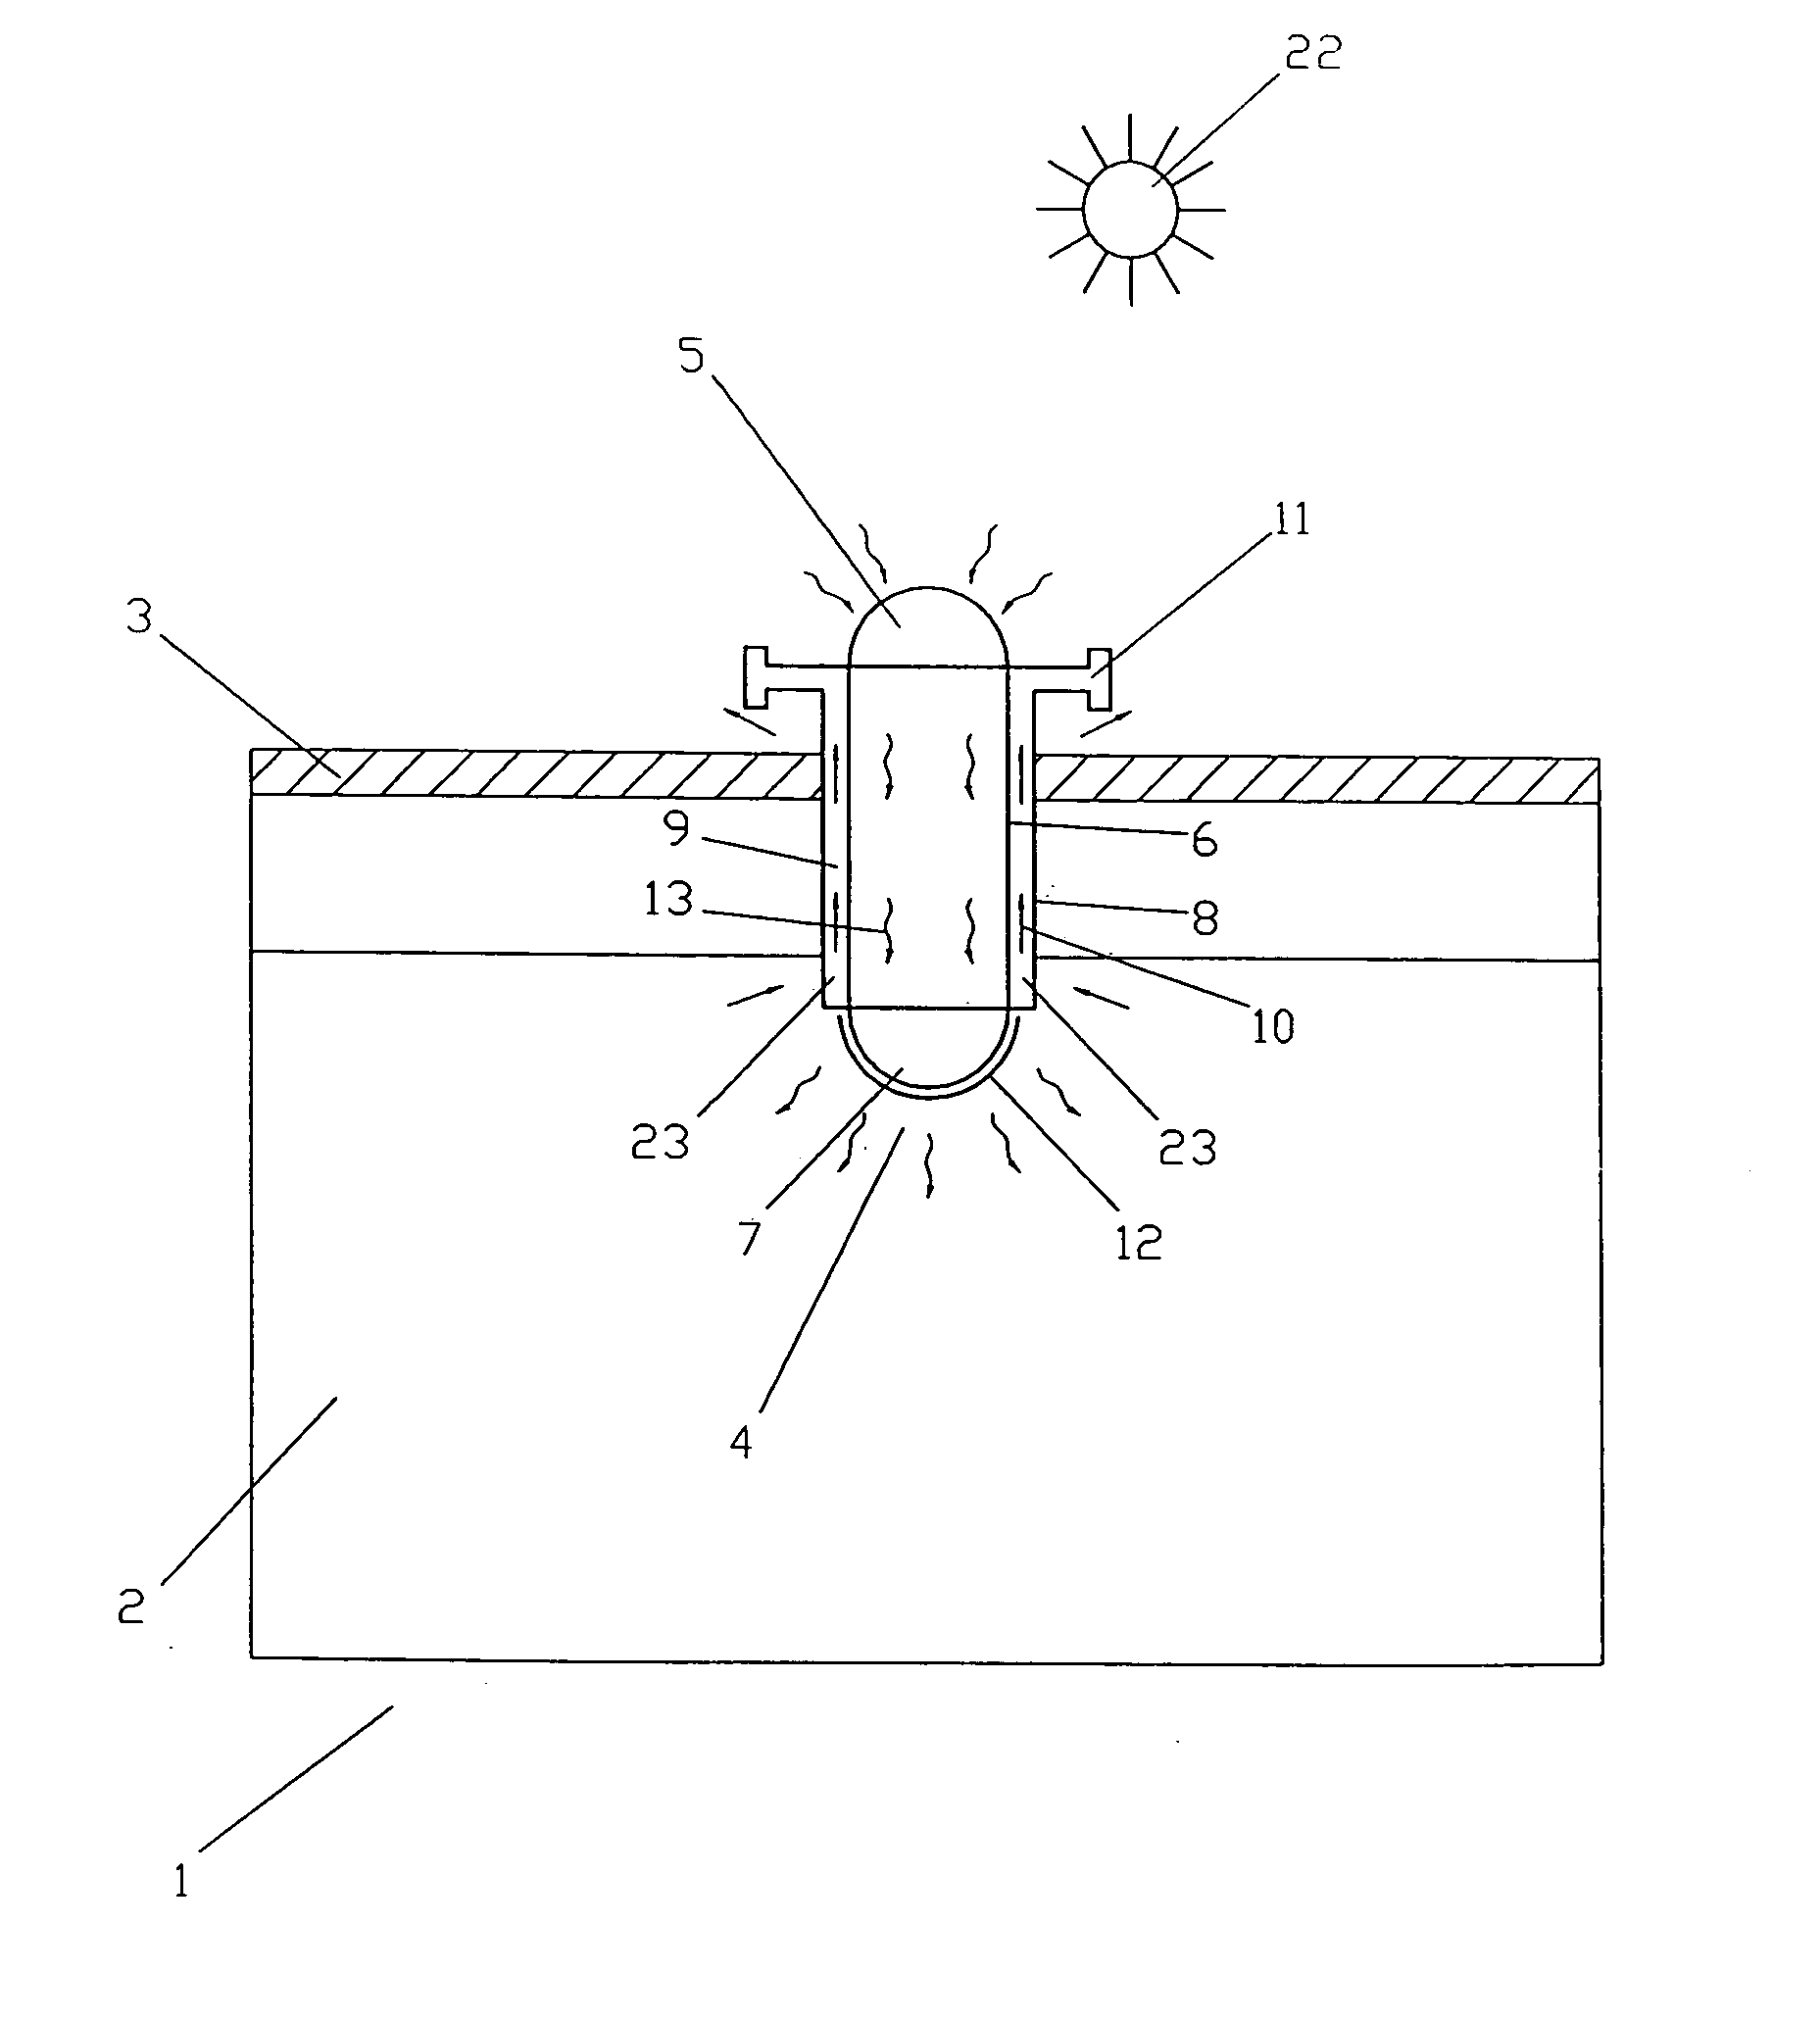 Light-pipe system for lighting, ventilation and photocatalytic air purification